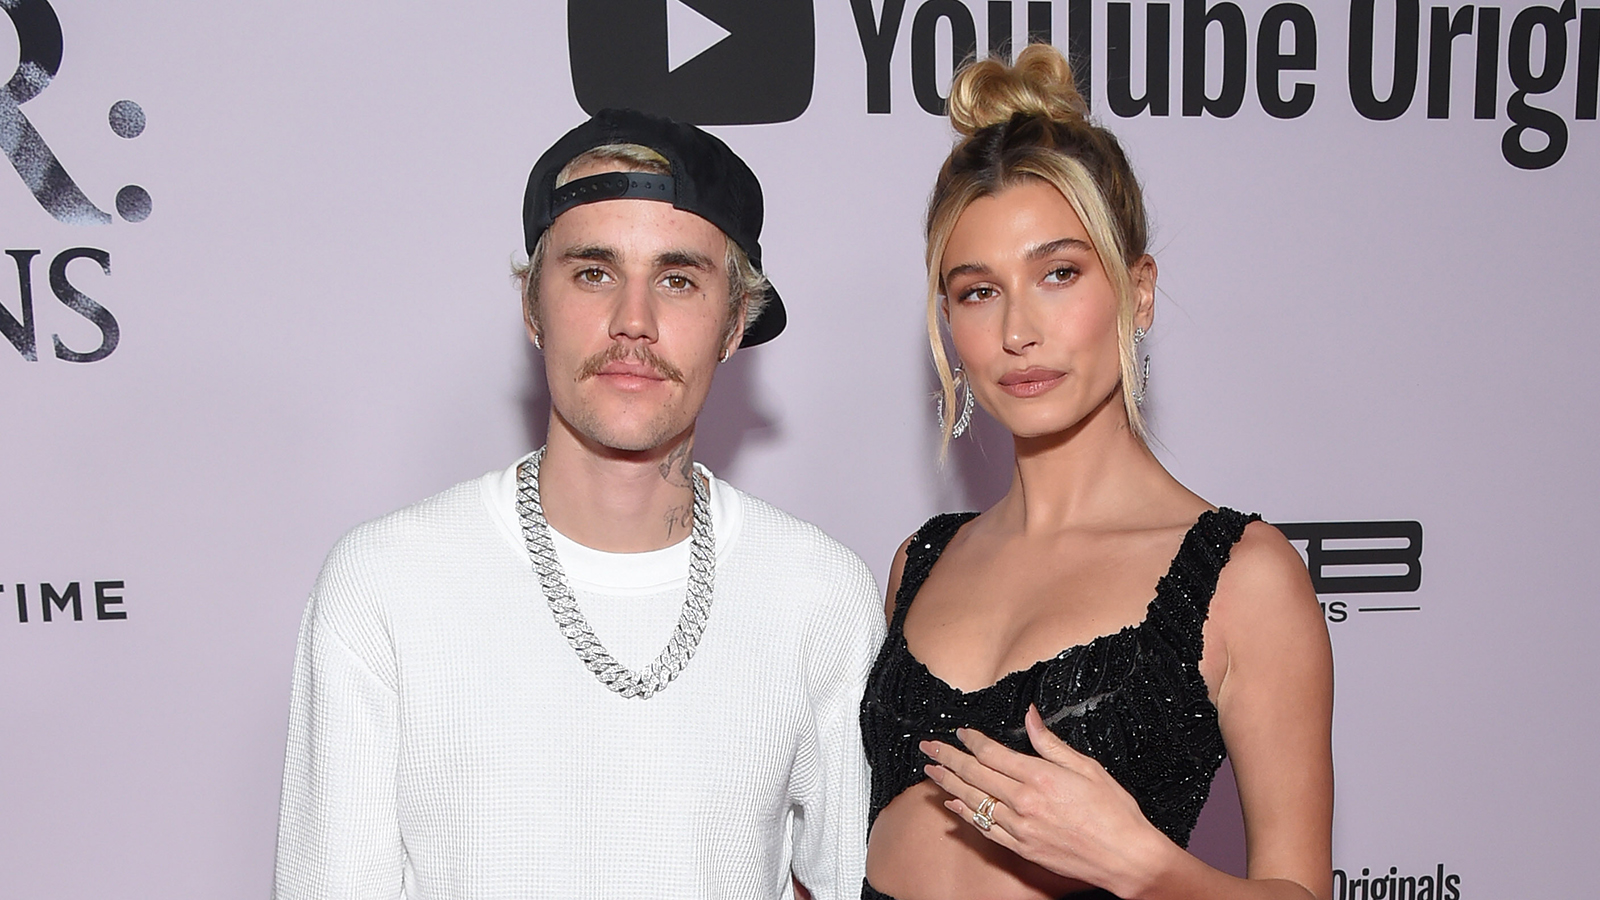 LOS ANGELES - JAN 27: Justin Bieber and Hailey Bieber {Object} arrives for the Premiere Of YouTube Originals' "Justin Bieber: Seasons" on January 27, 2020 in Westwood, CA